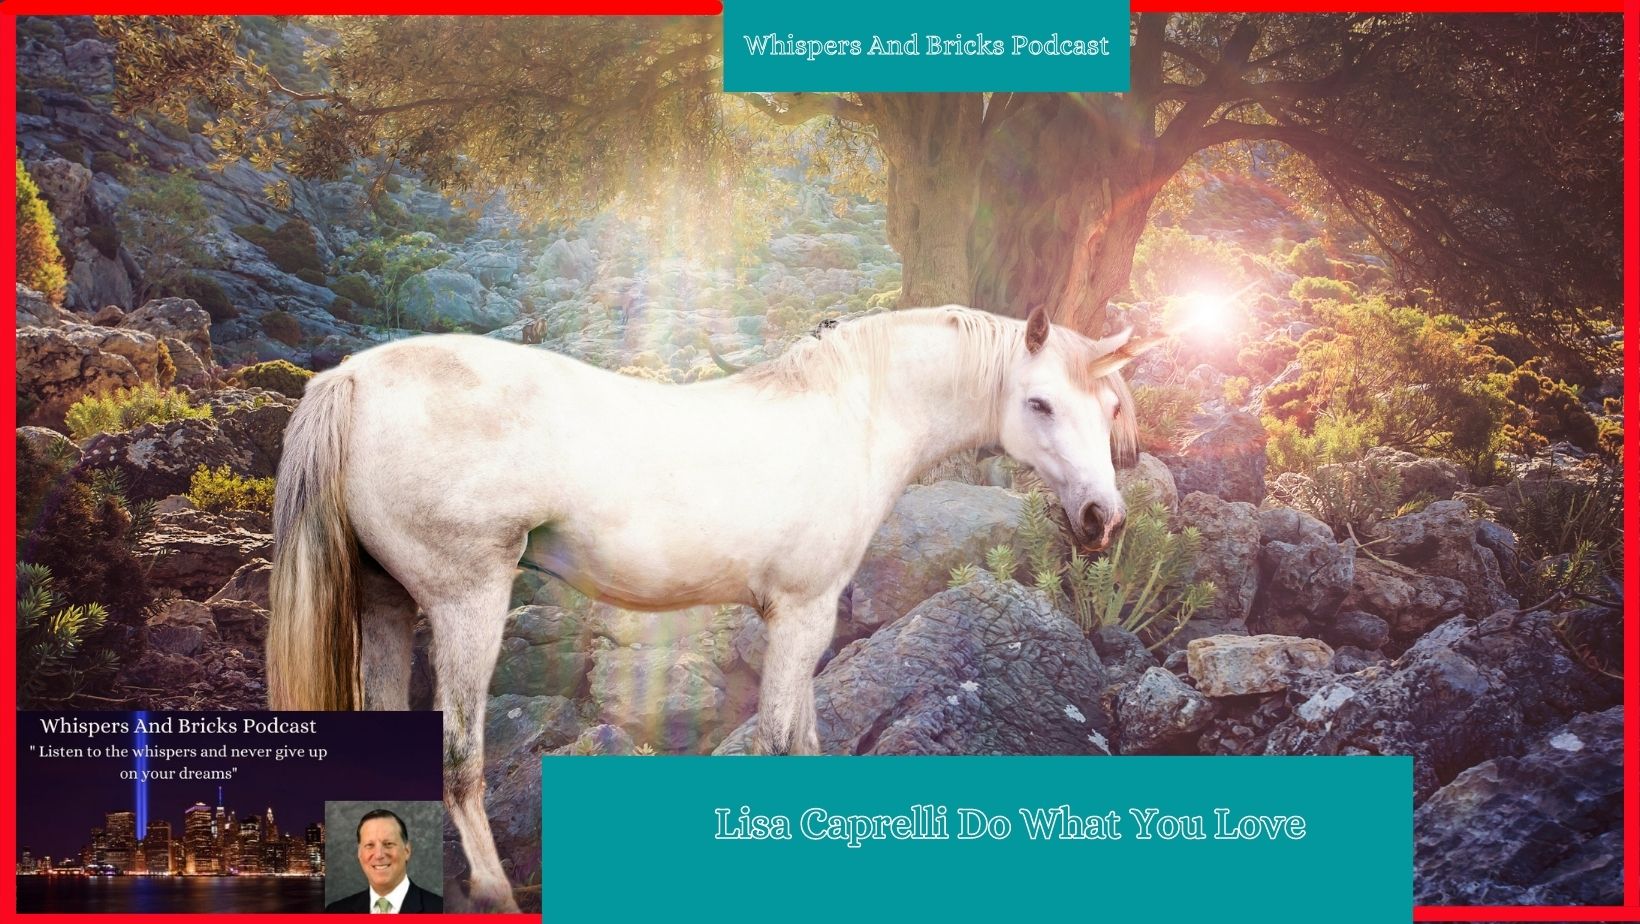 Whispers And Bricks Podcast Unicorn In Nature